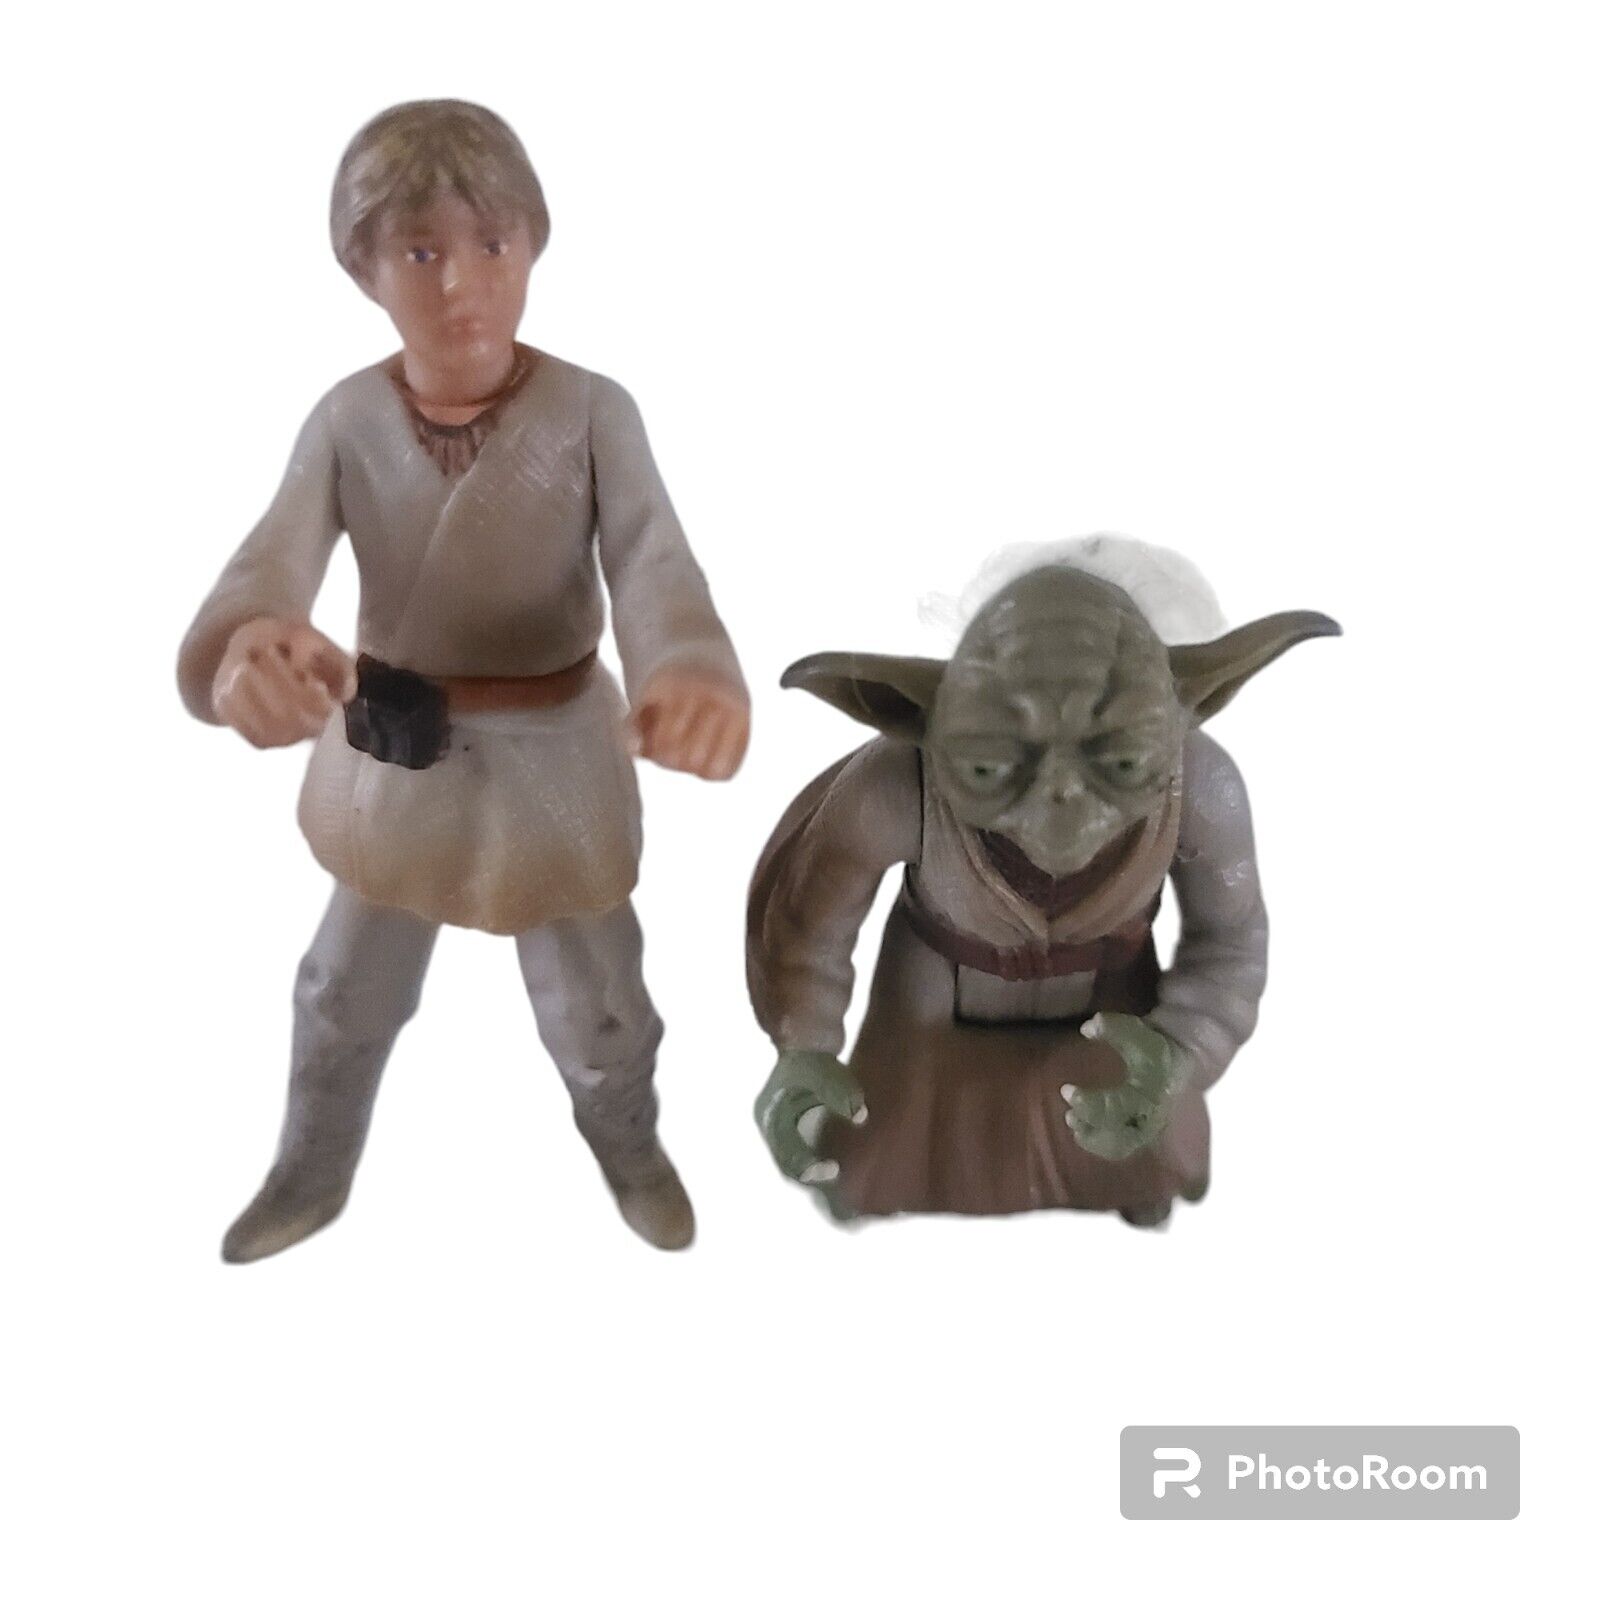 Star Wars Anakin Skywalker Yoda Action Figure Lot Of 2 The Power Of The Force 